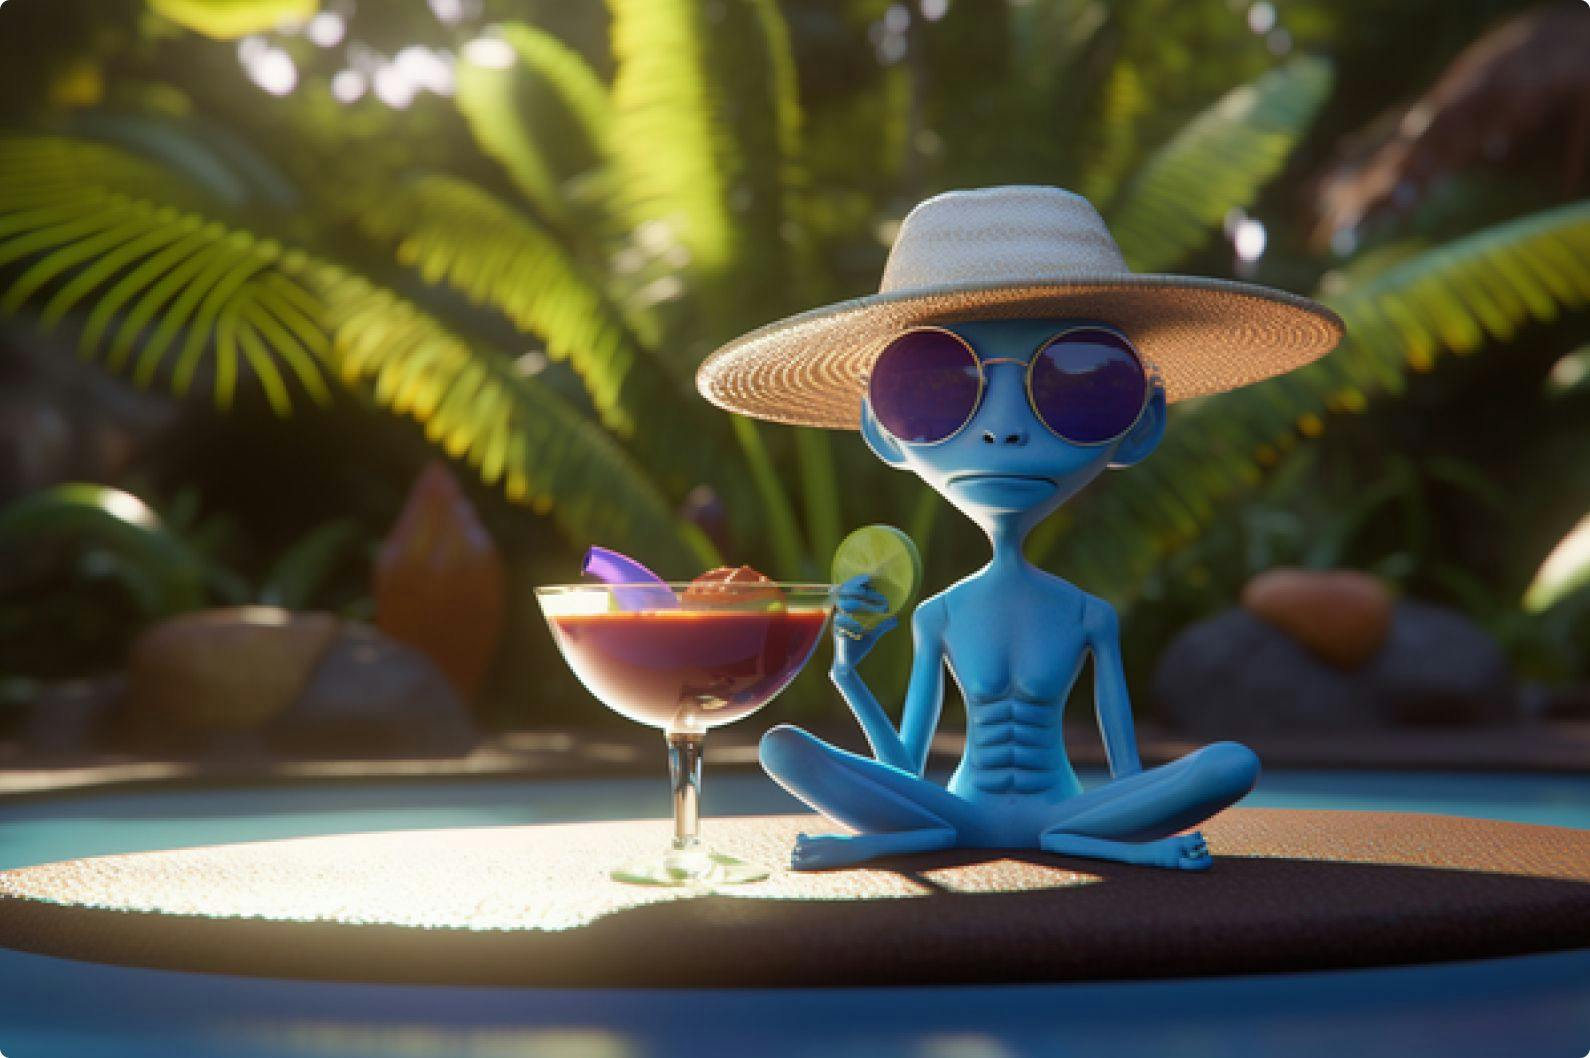 AI generated image of an alien drinking a cocktail by the pool, wearing sunglasses and hat in a tropical background